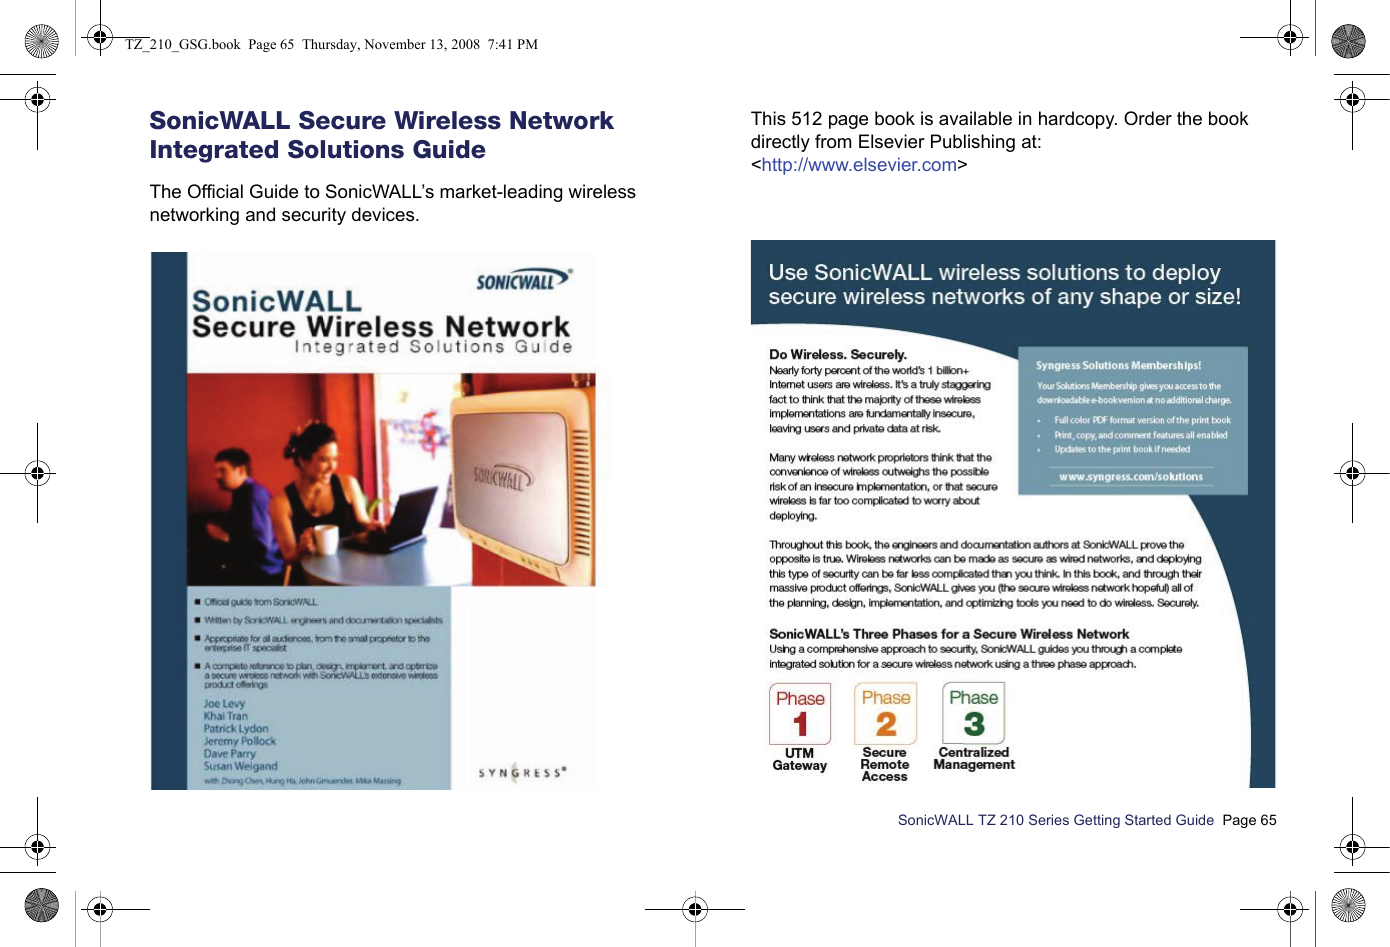 SonicWALL TZ 210 Series Getting Started Guide  Page 65SonicWALL Secure Wireless Network Integrated Solutions GuideThe Official Guide to SonicWALL’s market-leading wireless networking and security devices. This 512 page book is available in hardcopy. Order the book directly from Elsevier Publishing at:&lt;http://www.elsevier.com&gt;TZ_210_GSG.book  Page 65  Thursday, November 13, 2008  7:41 PM